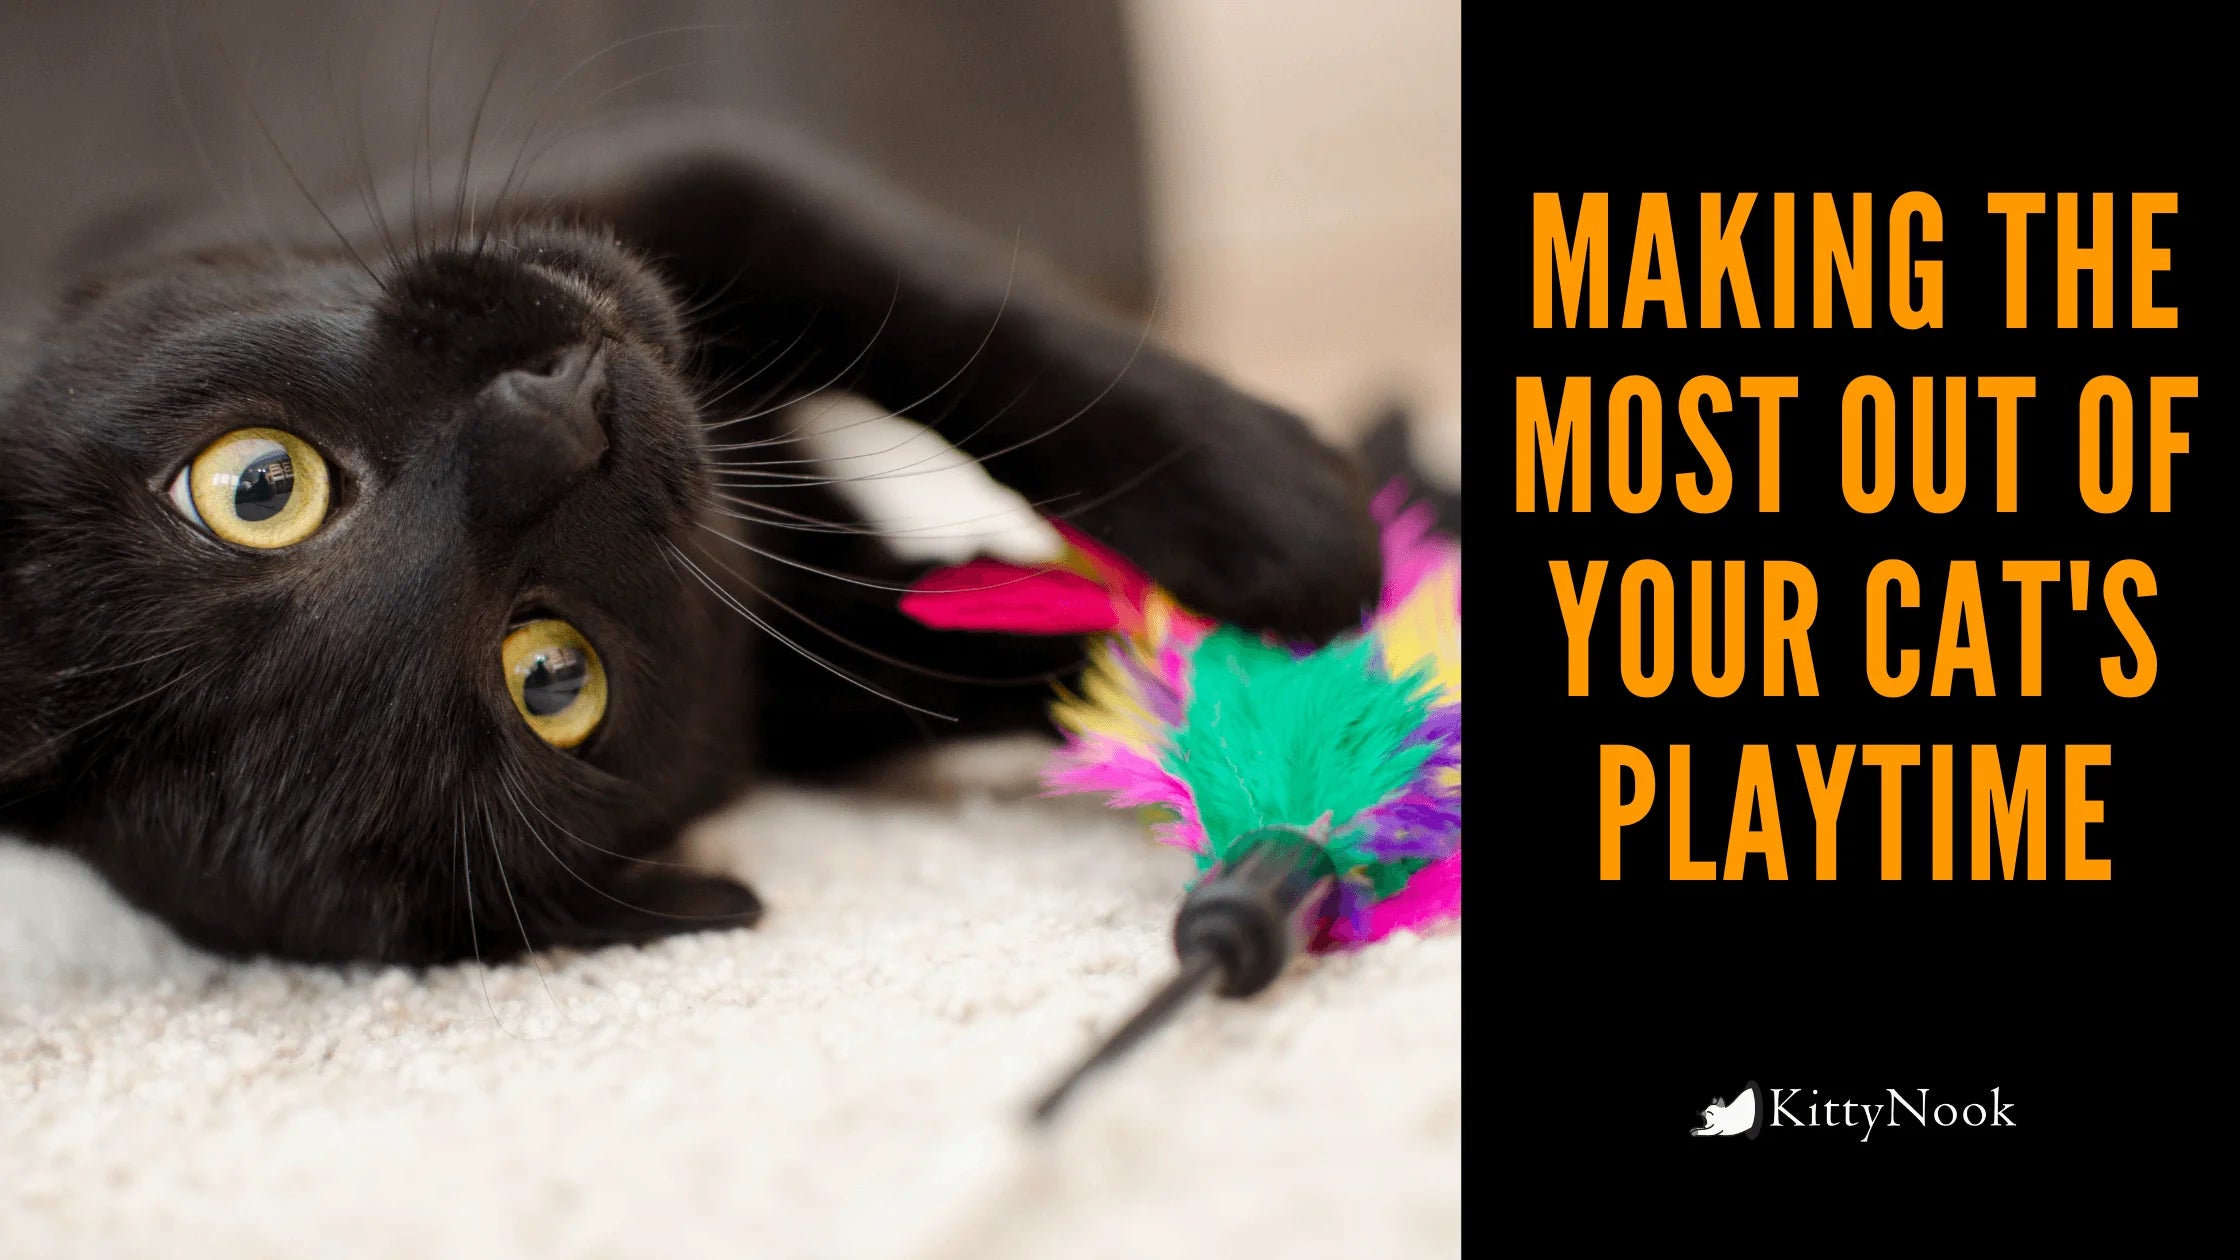 Making The Most Out Of Your Cat's Playtime - KittyNook Cat Company